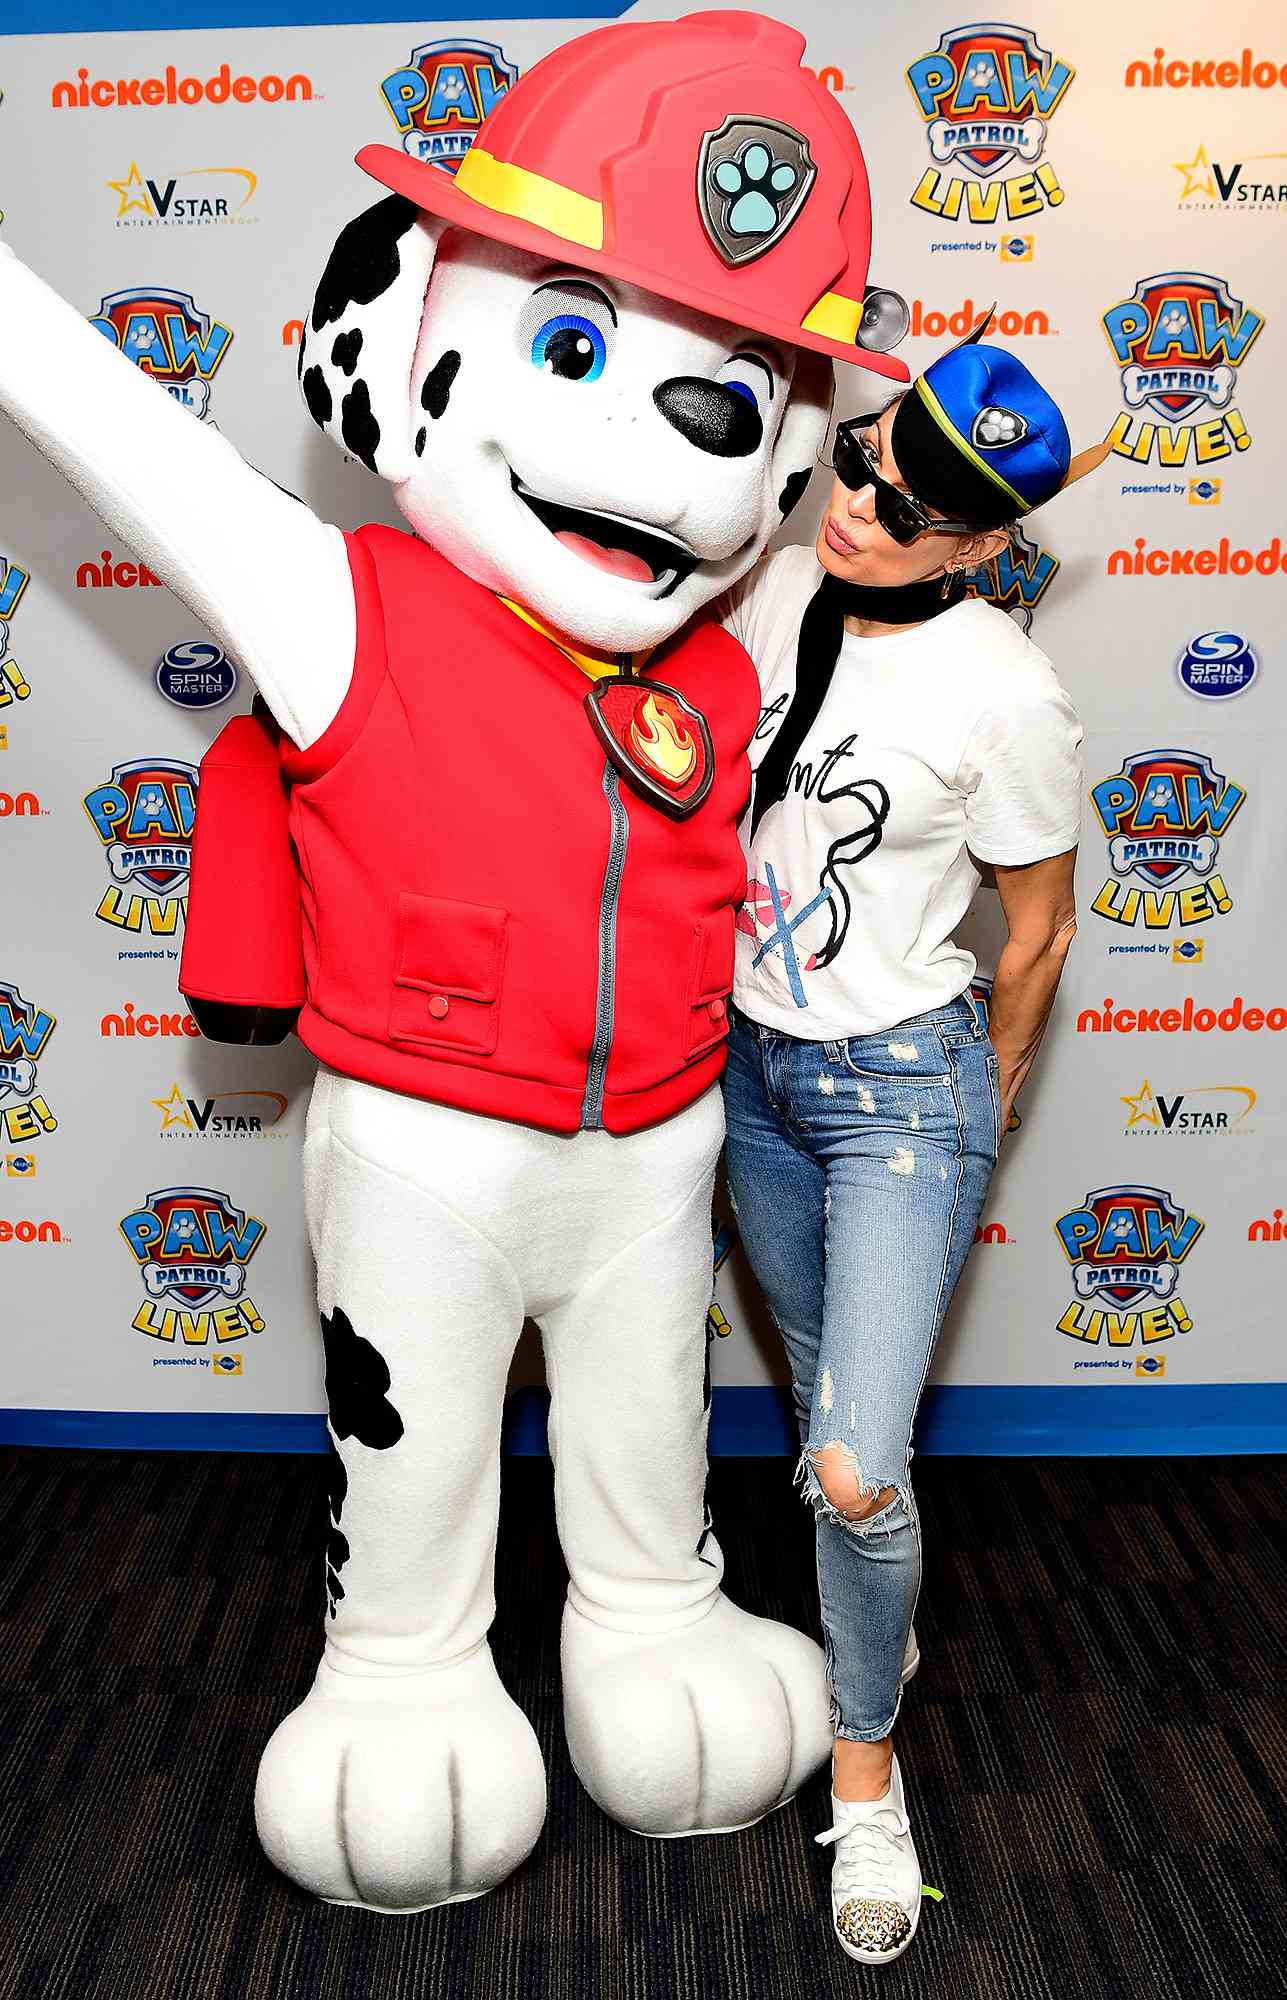 Nickelodeon And VStar Entertainment Group's PAW Patrol Live! "Race to the Rescue"